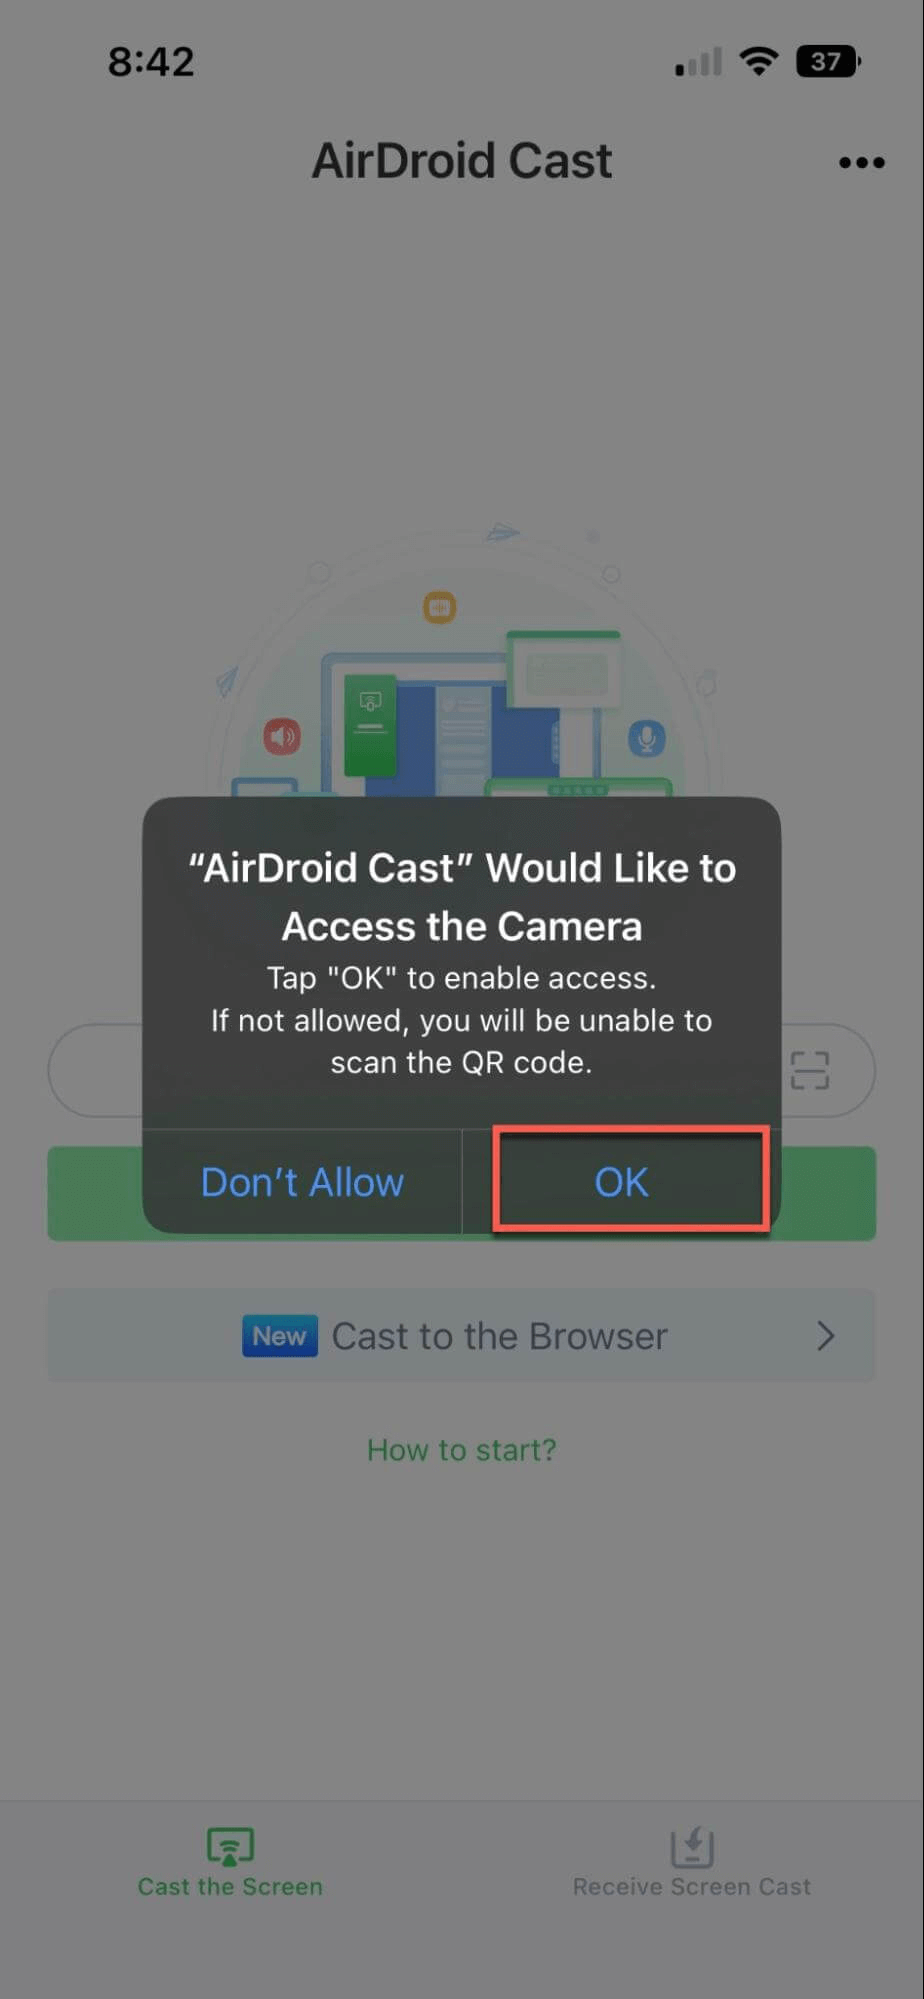 Allow the AirDroid Cast app to access the camera